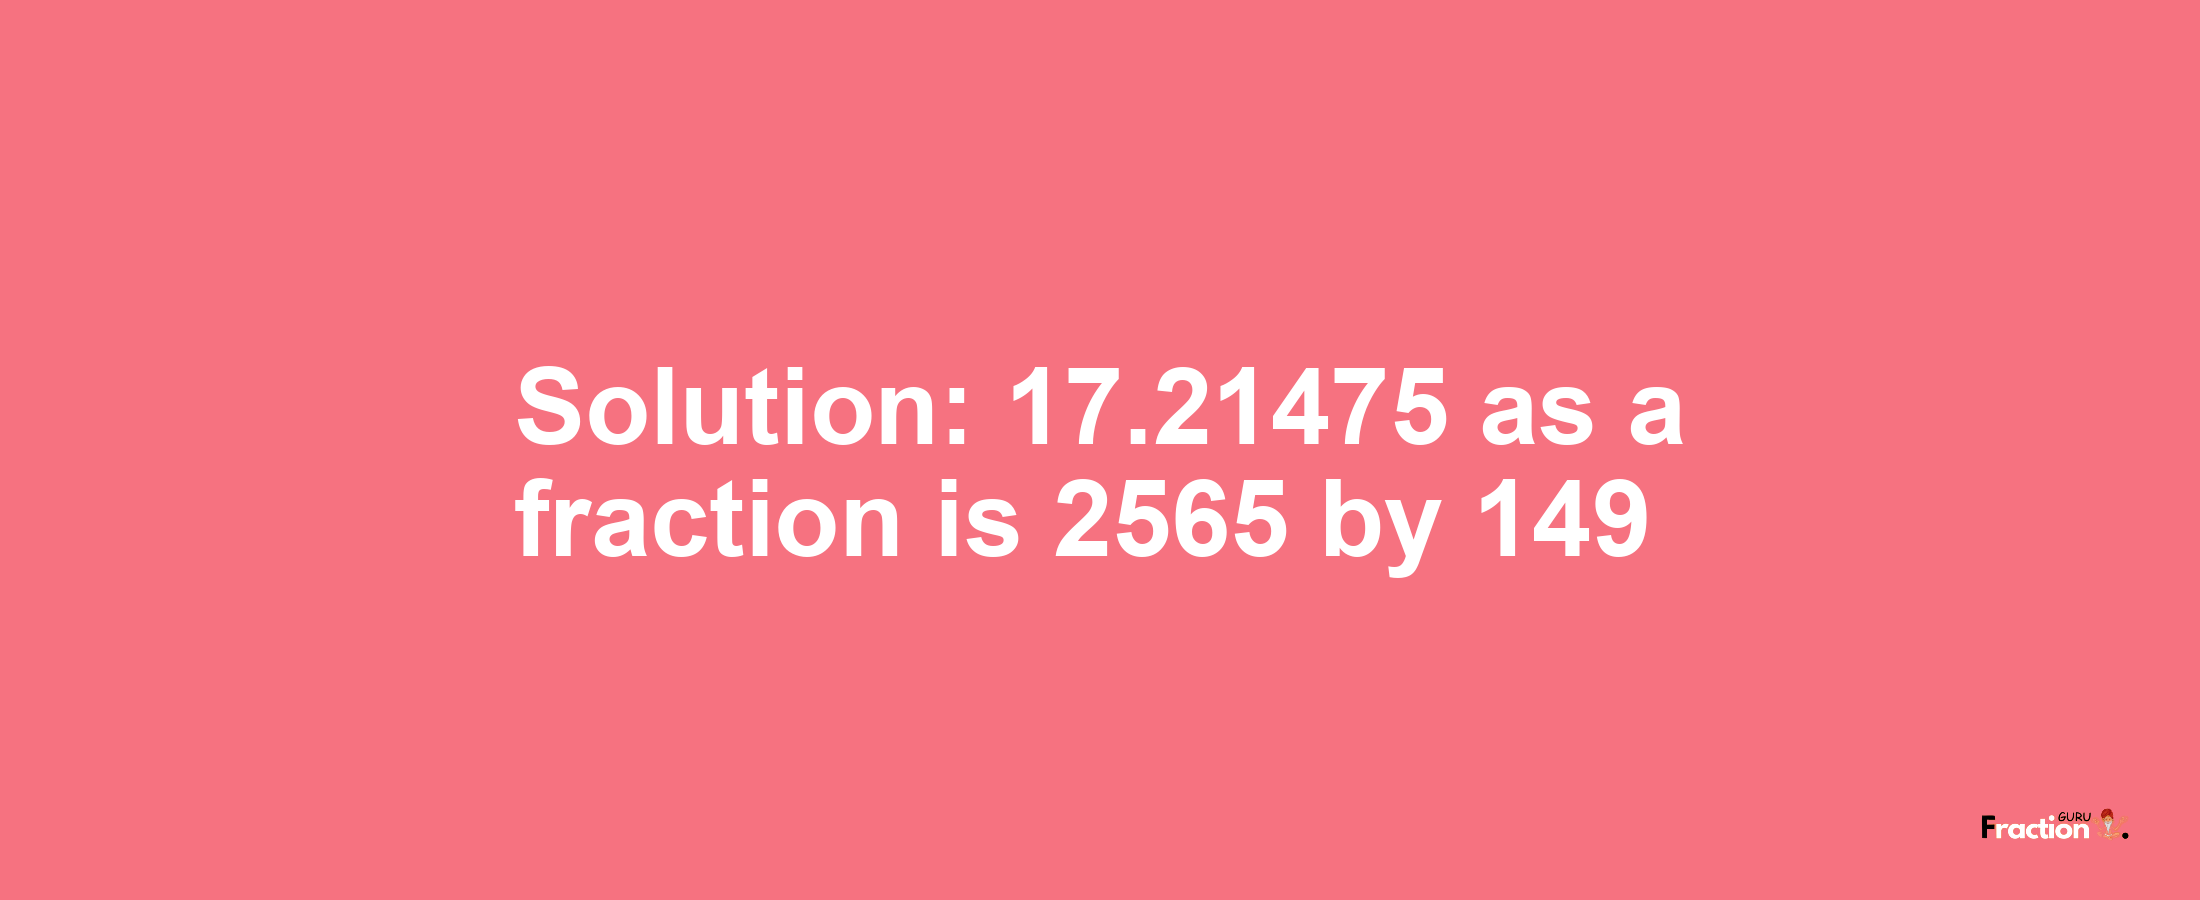 Solution:17.21475 as a fraction is 2565/149